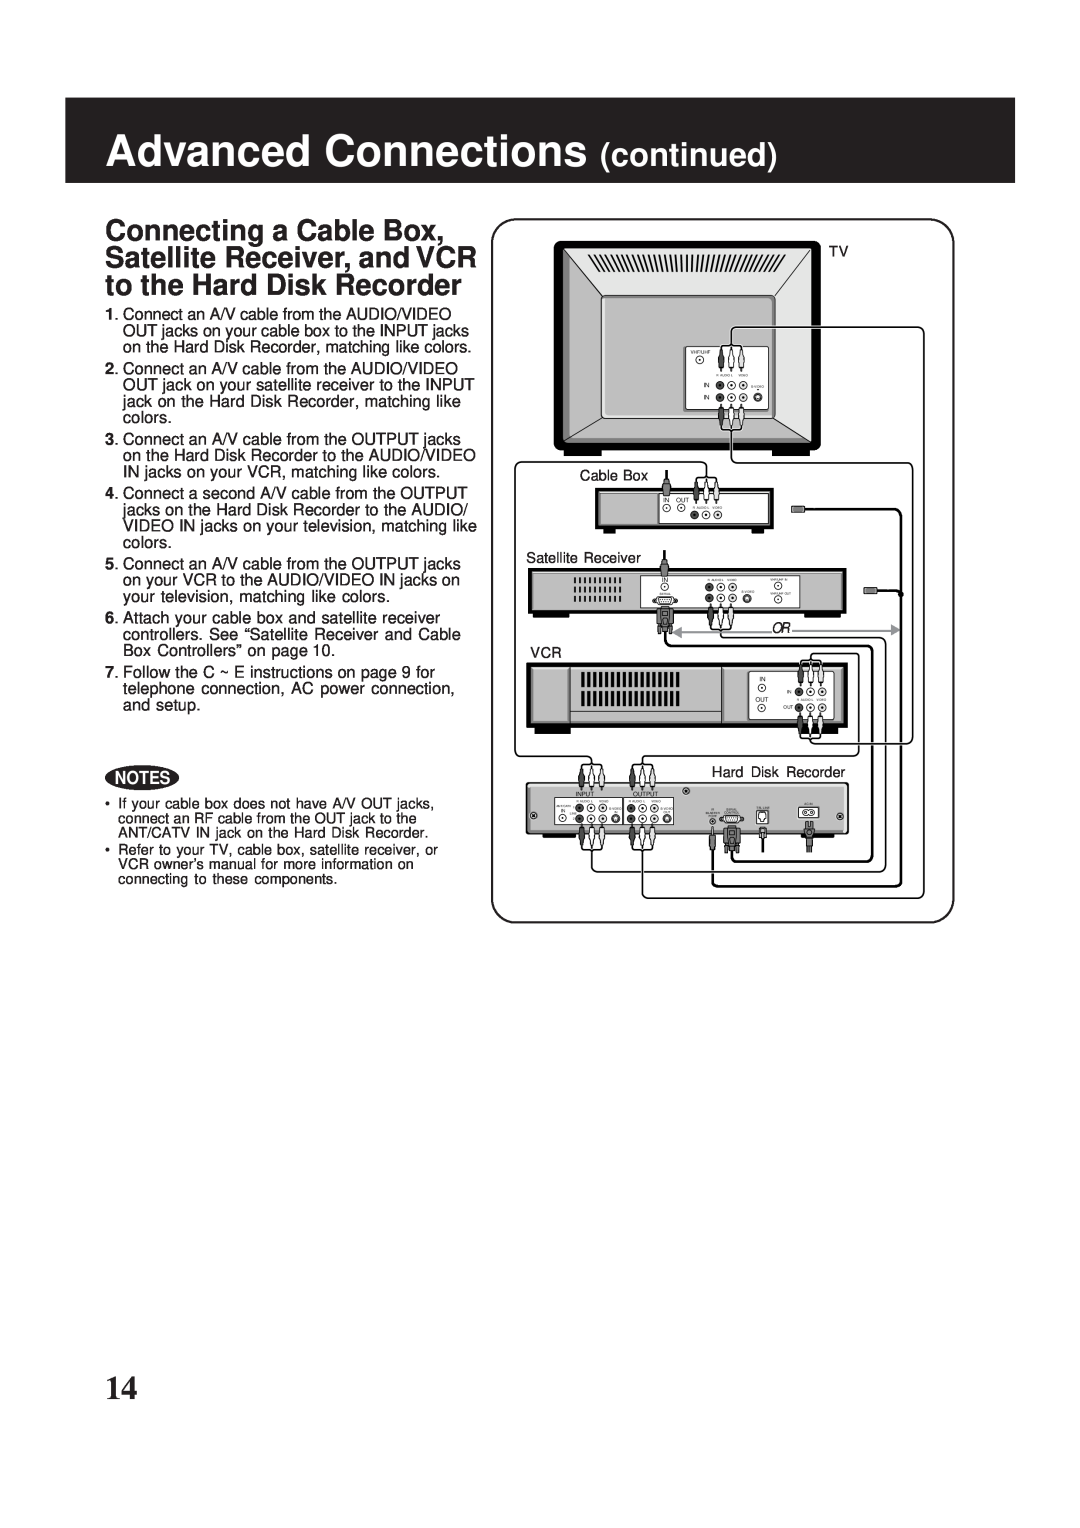 Panasonic PV-HS2000 operating instructions Advanced Connections continued 